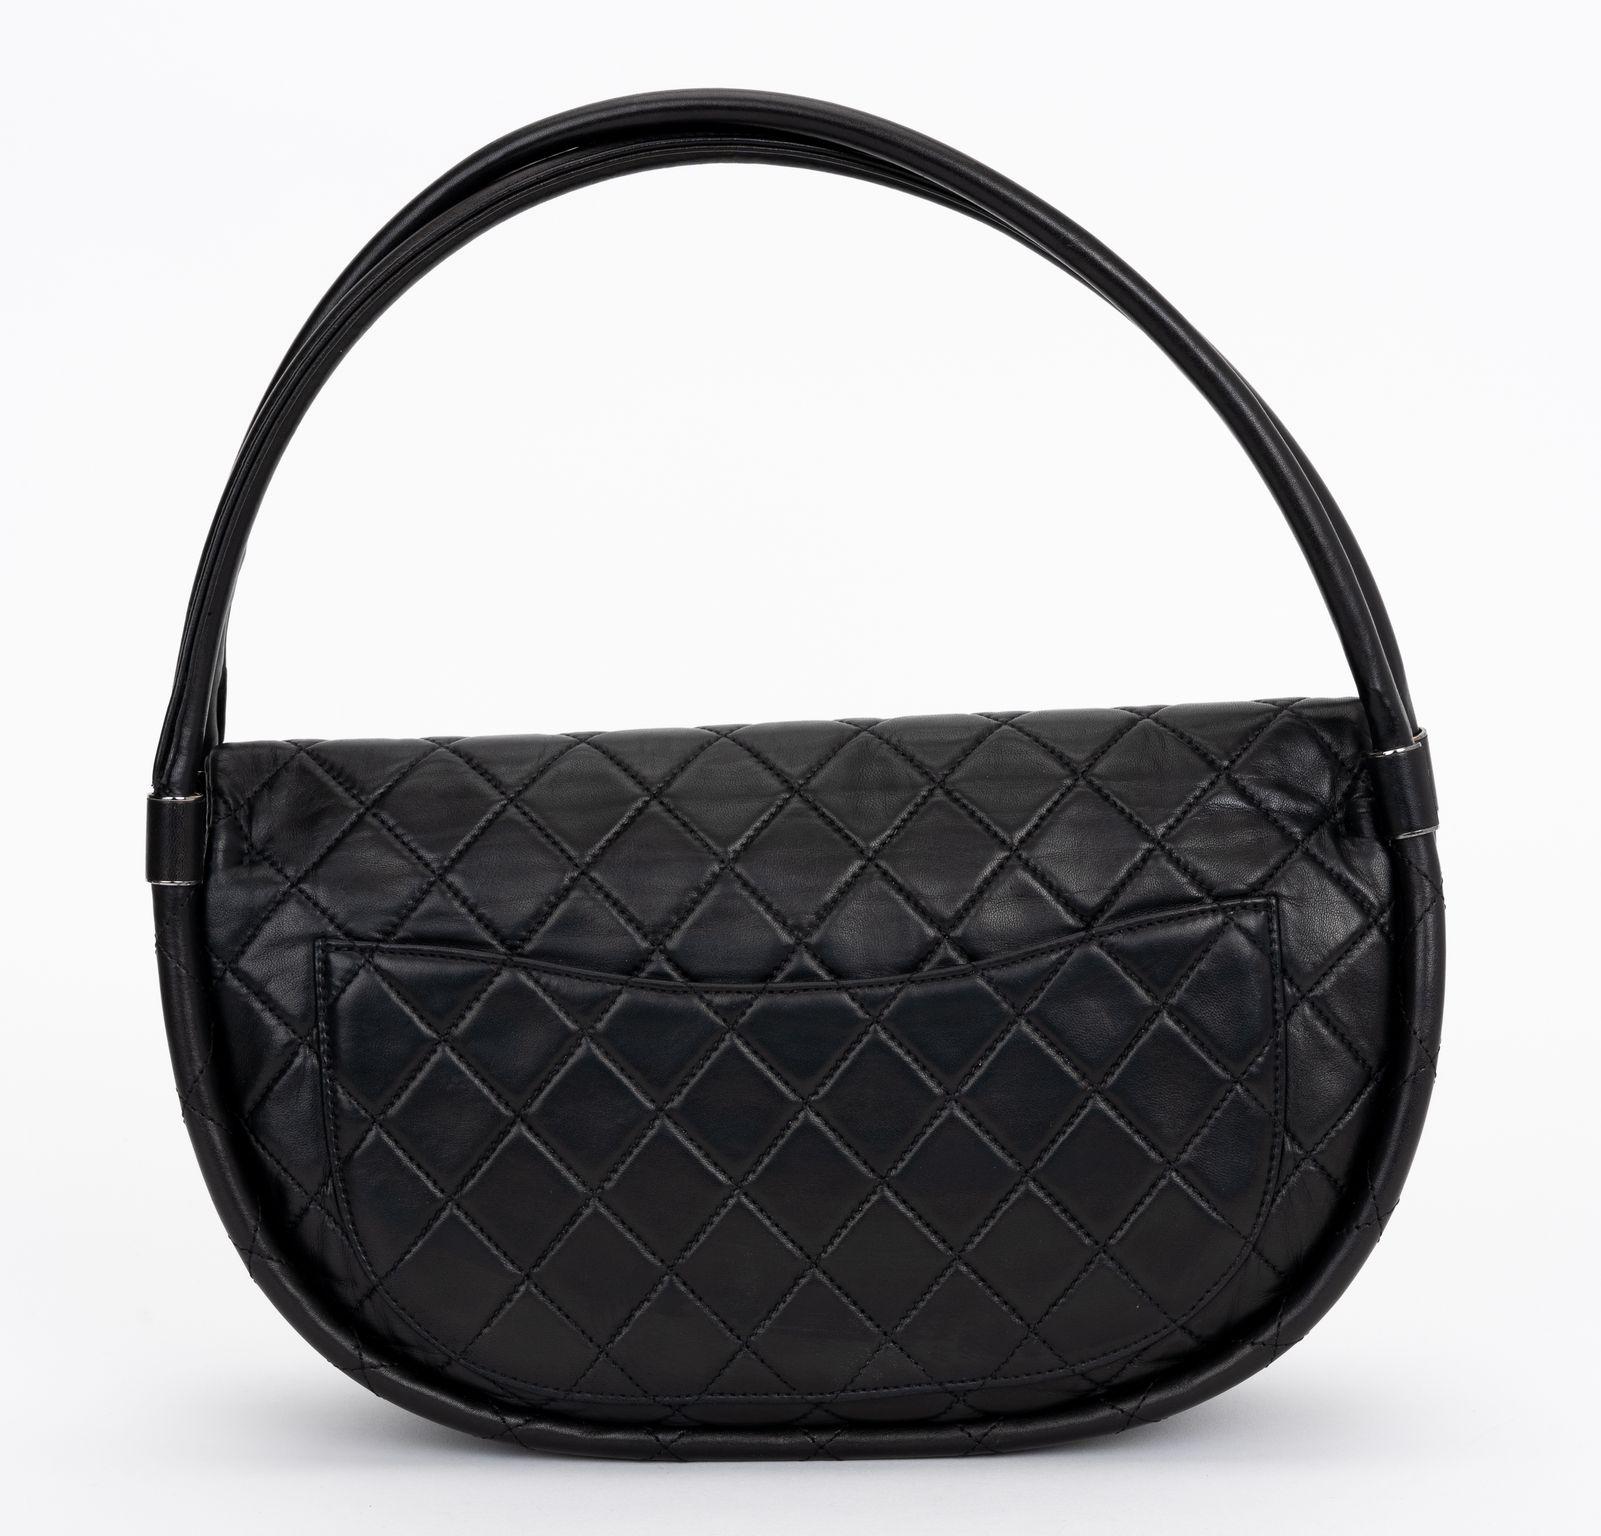 Chanel Collectible Black Hula Hoop Bag In Excellent Condition For Sale In West Hollywood, CA